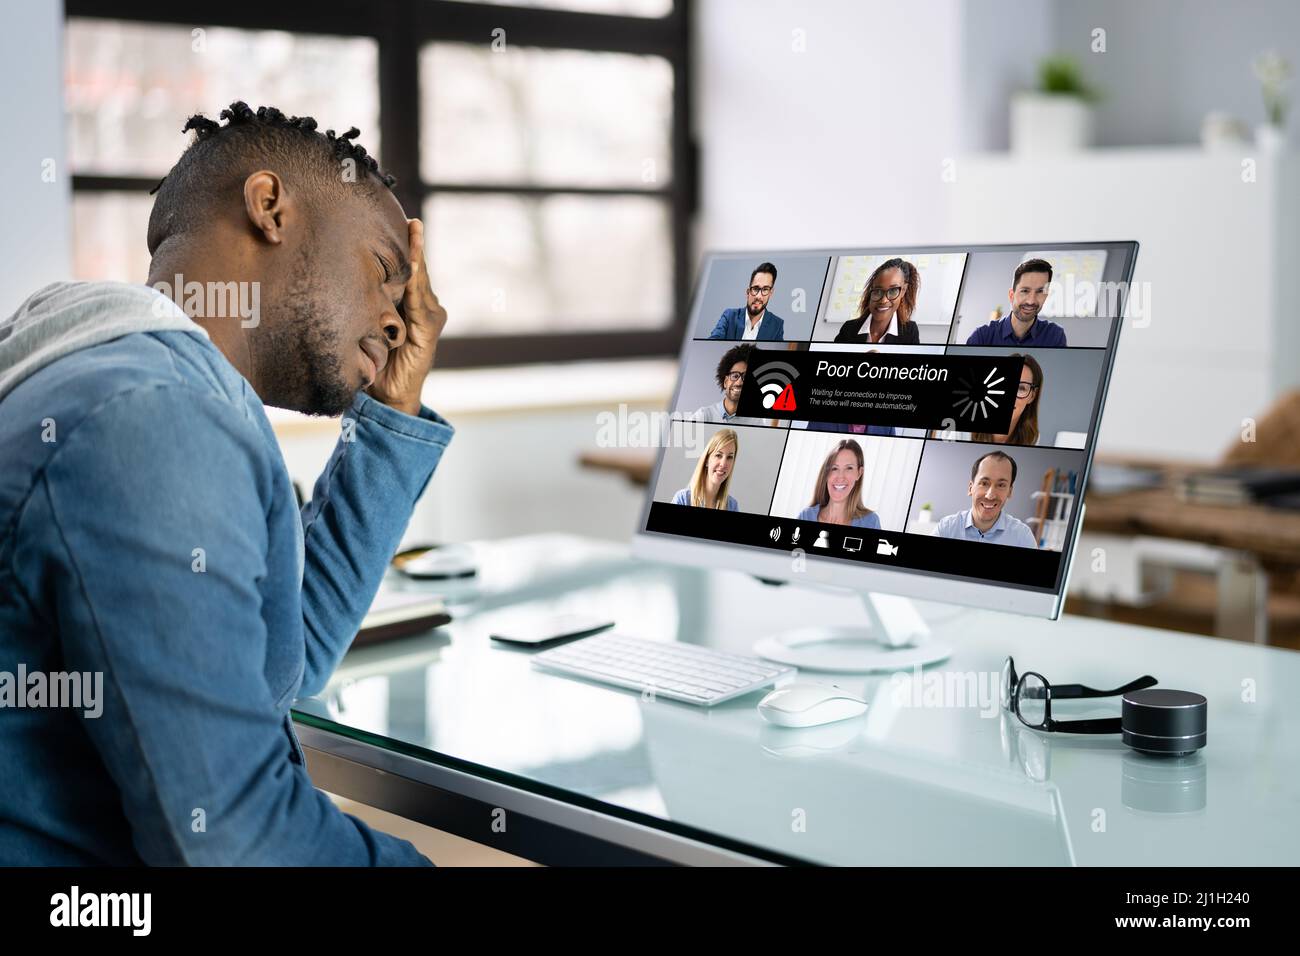 Online Video Meeting Bad Connection And Poor Signal Stock Photo Alamy